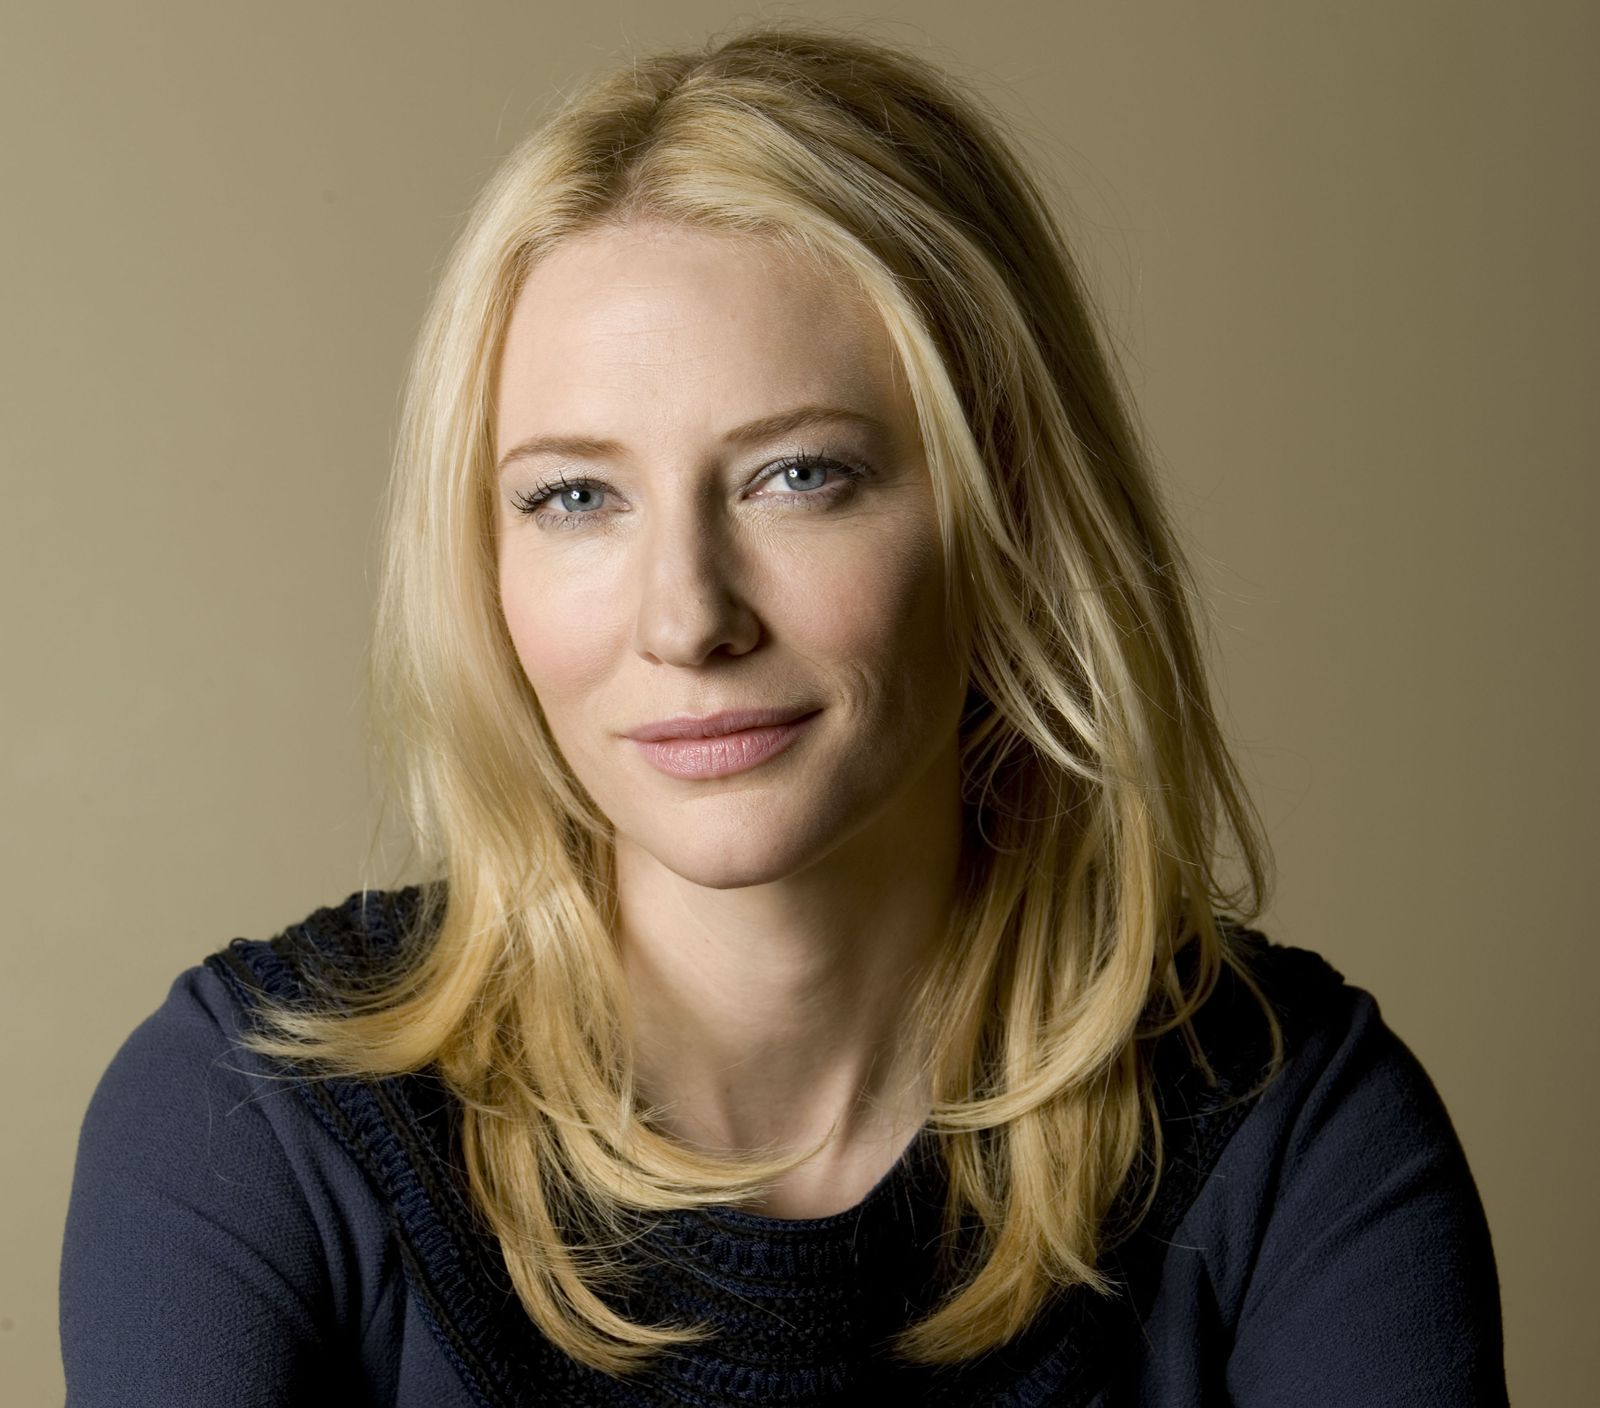 Cate Blanchett Approached For 'The House With a Clock in Its Walls'